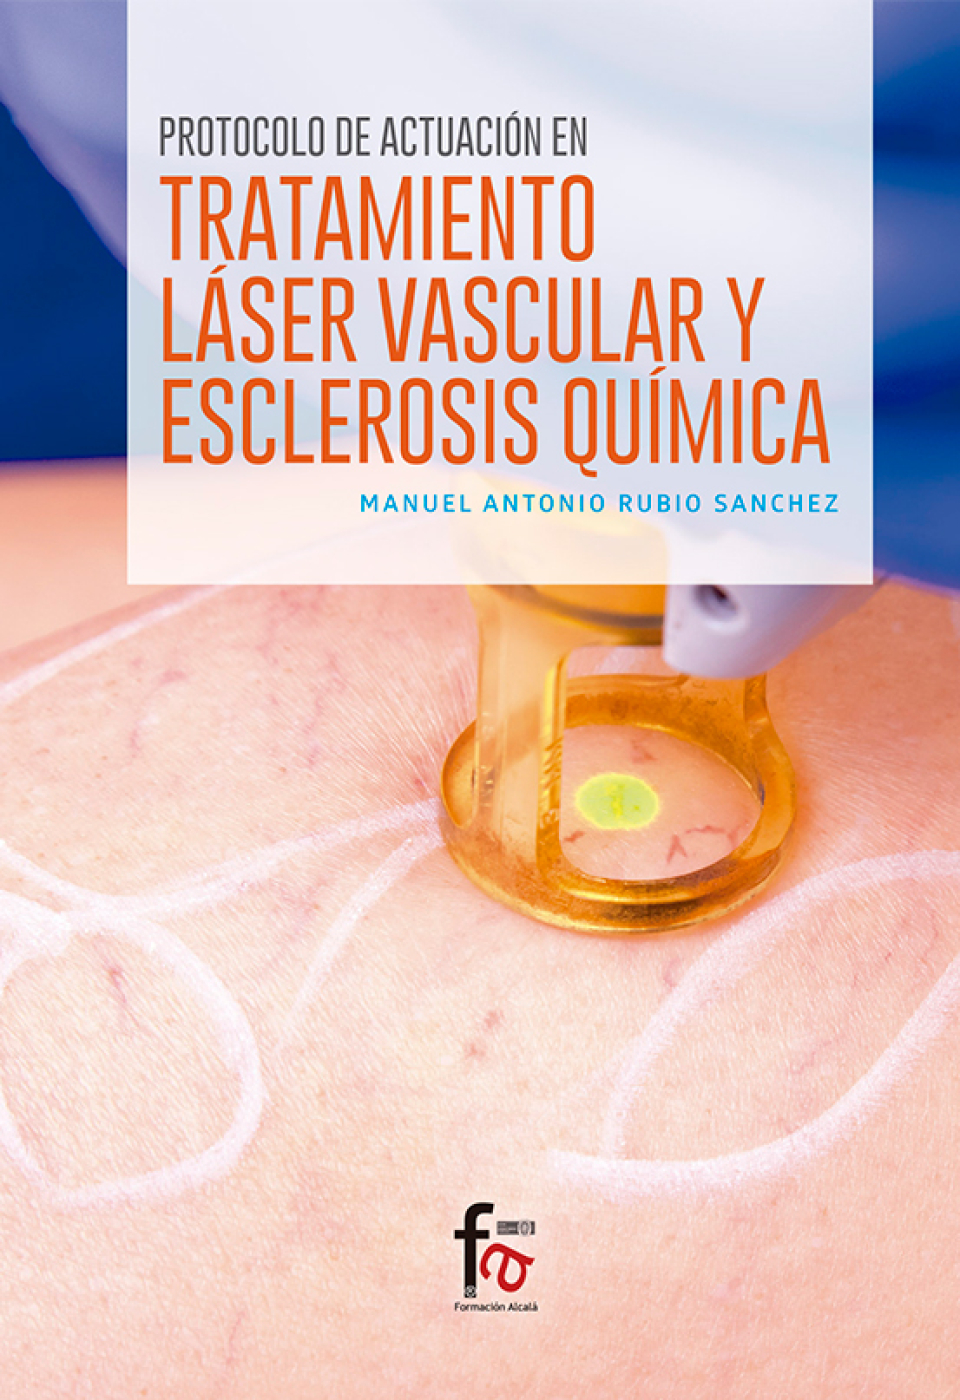 Protocol of action in Vascular Laser Treatment and Chemical Sclerosis